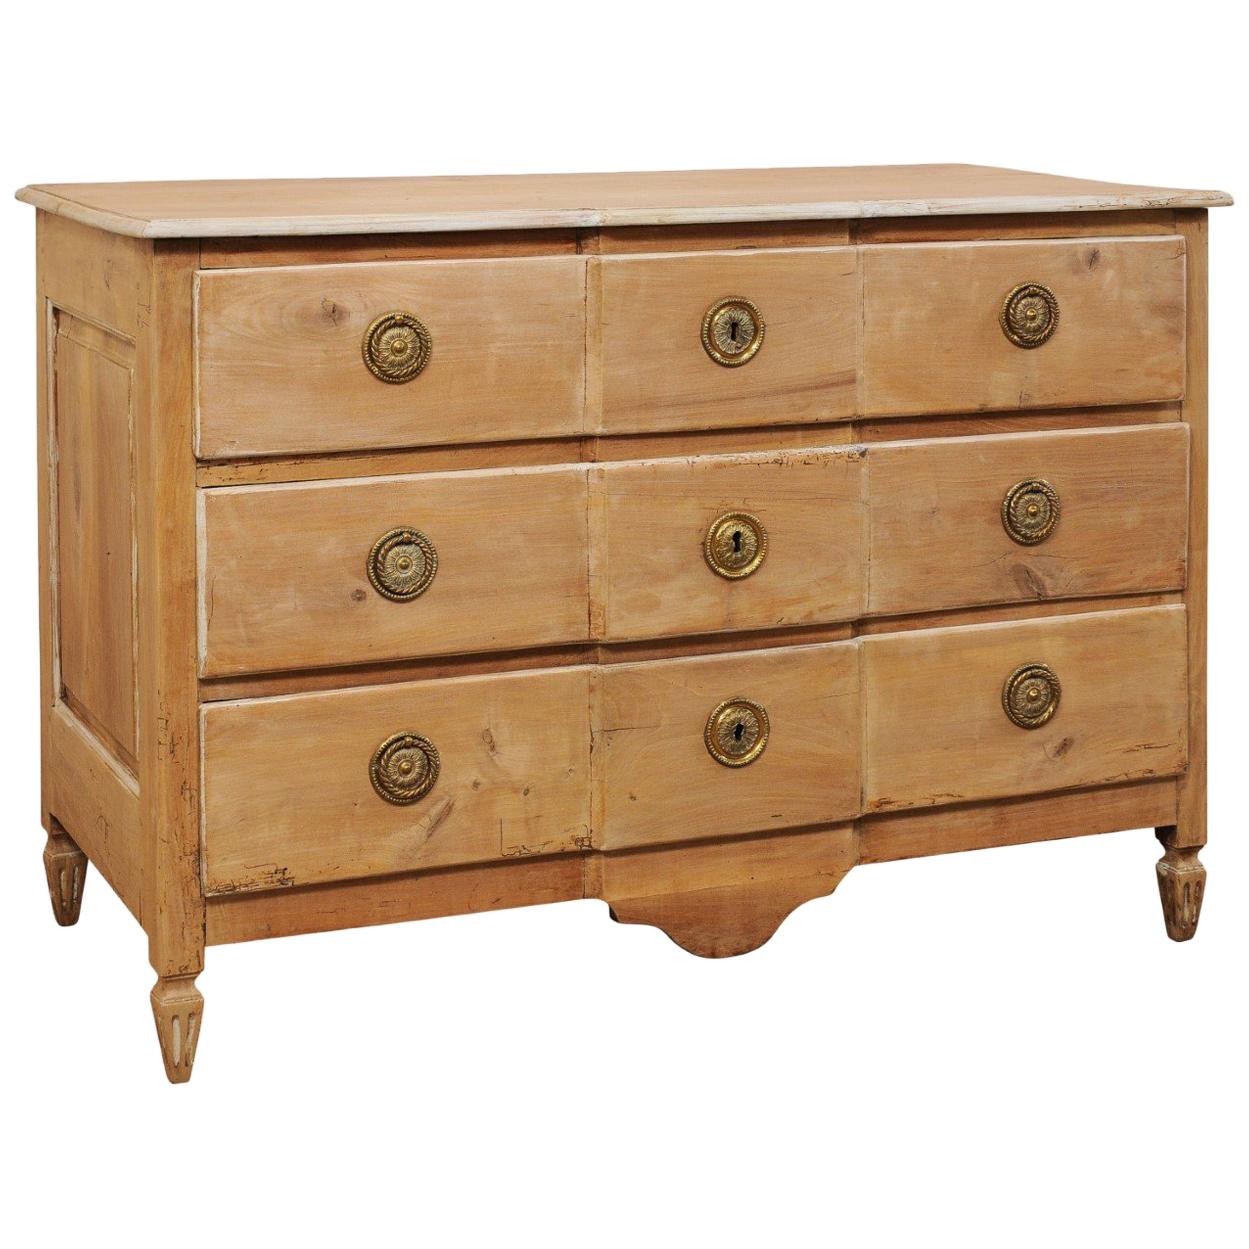 18th Century French Pale Wood Three-Drawer Chest with Painted Trim